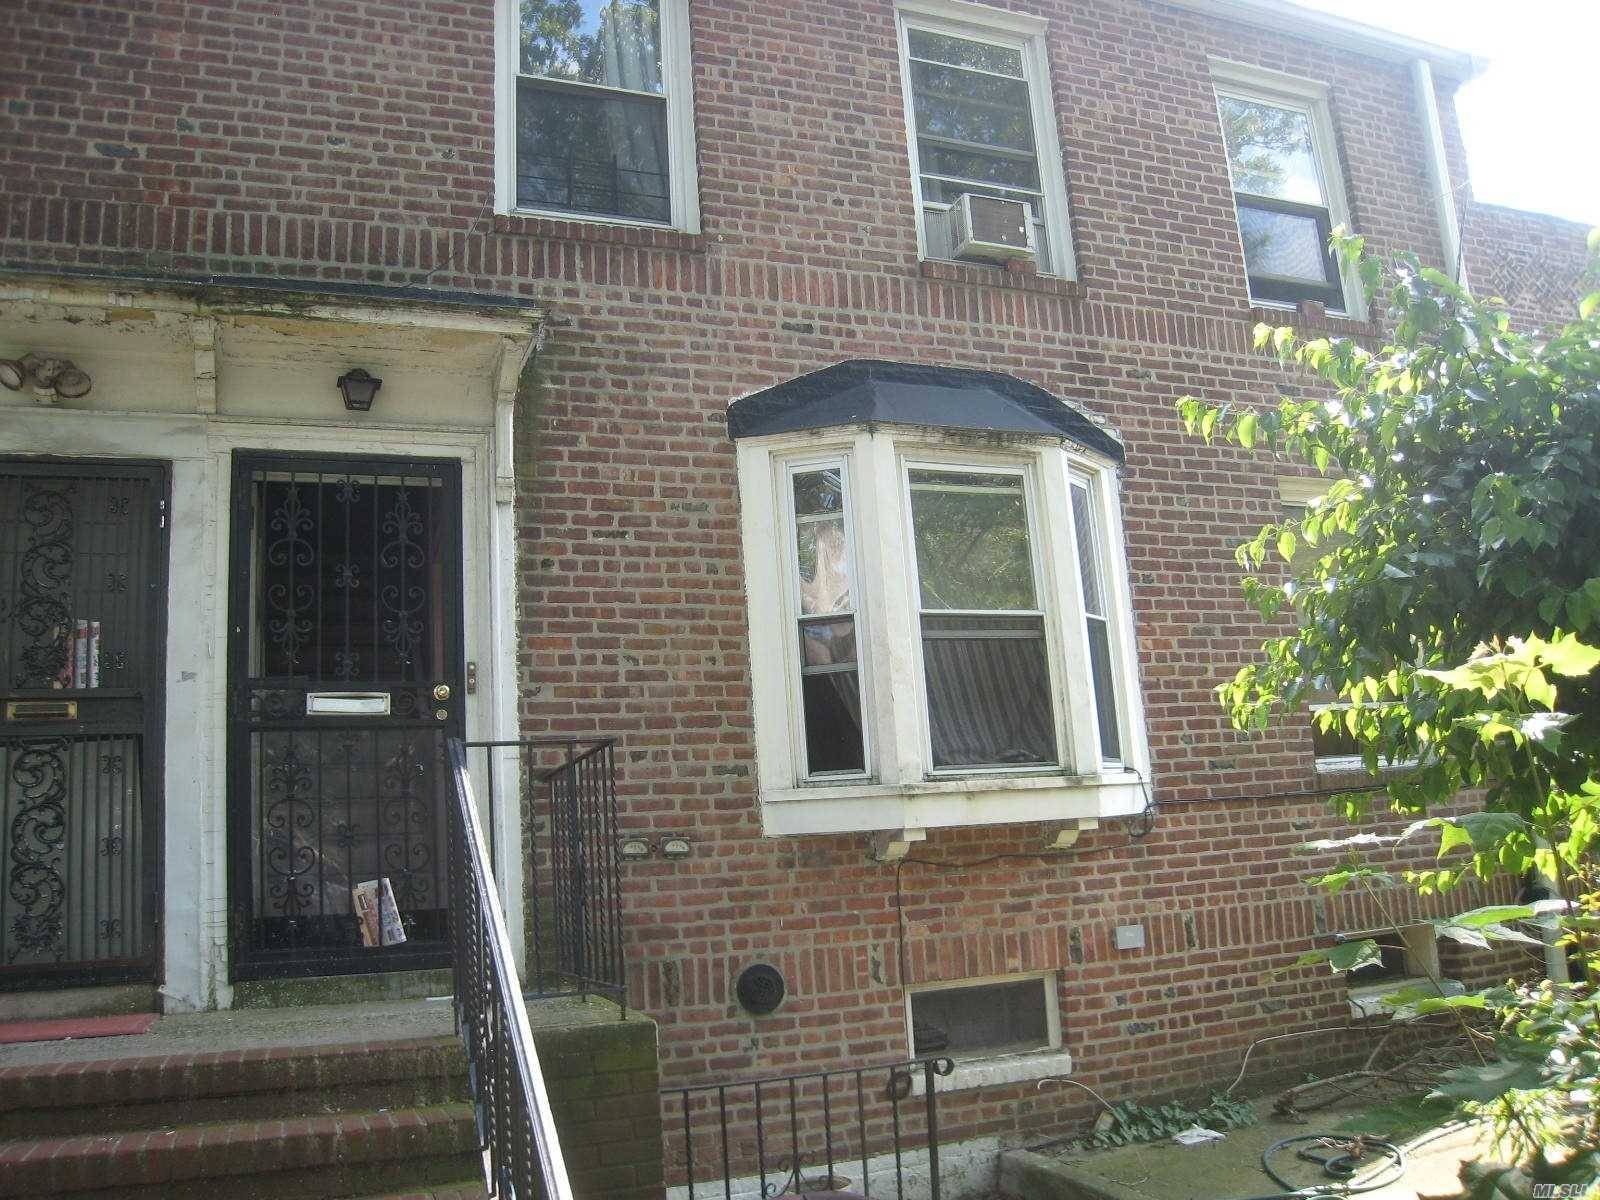 Charming 2 Family Townhouse Adjacent To Sunnyside Gardens, Only Blocks From Subway Station.